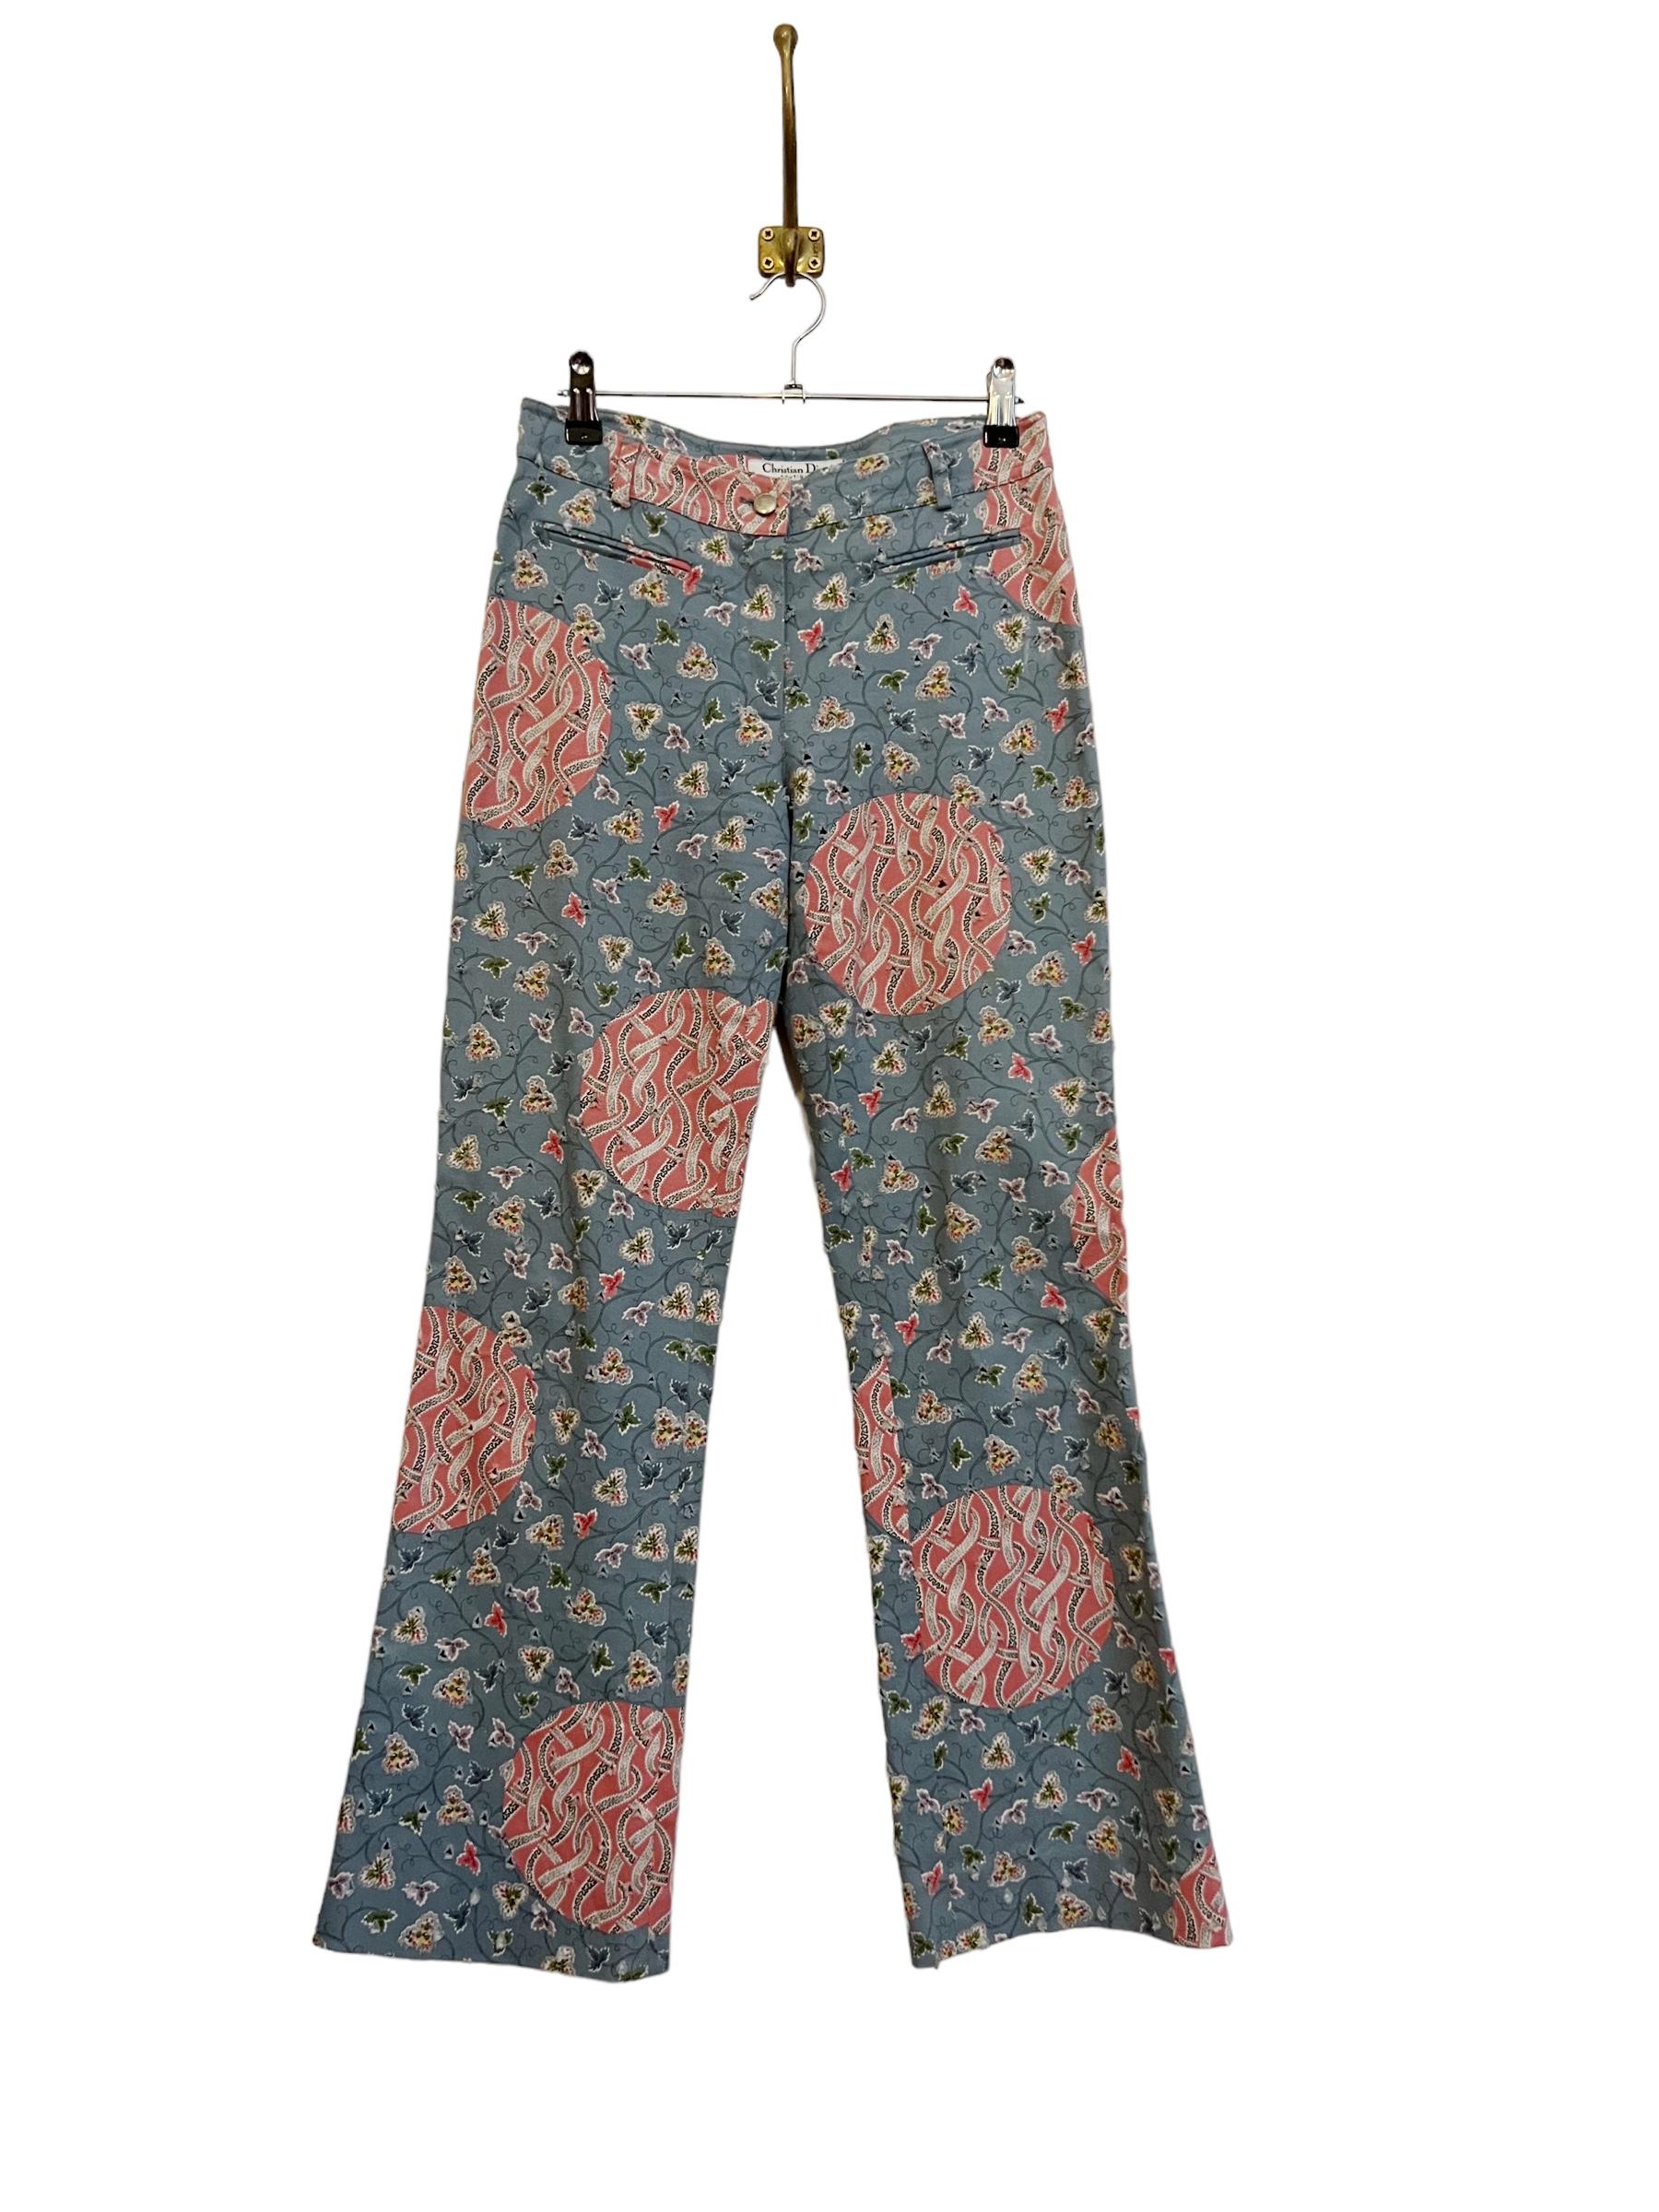 Y2k Galliano era Christian Dior Pants in a beautiful blossom patterned fabric with a perforated distressed style texture. 

MADE IN FRANCE 

Features: 
Button / Zip fasten
2 Front pockets
Low Rise 
Belt Loops

98% Cotton 
2% Lycra 

Sizing:  
Waist: